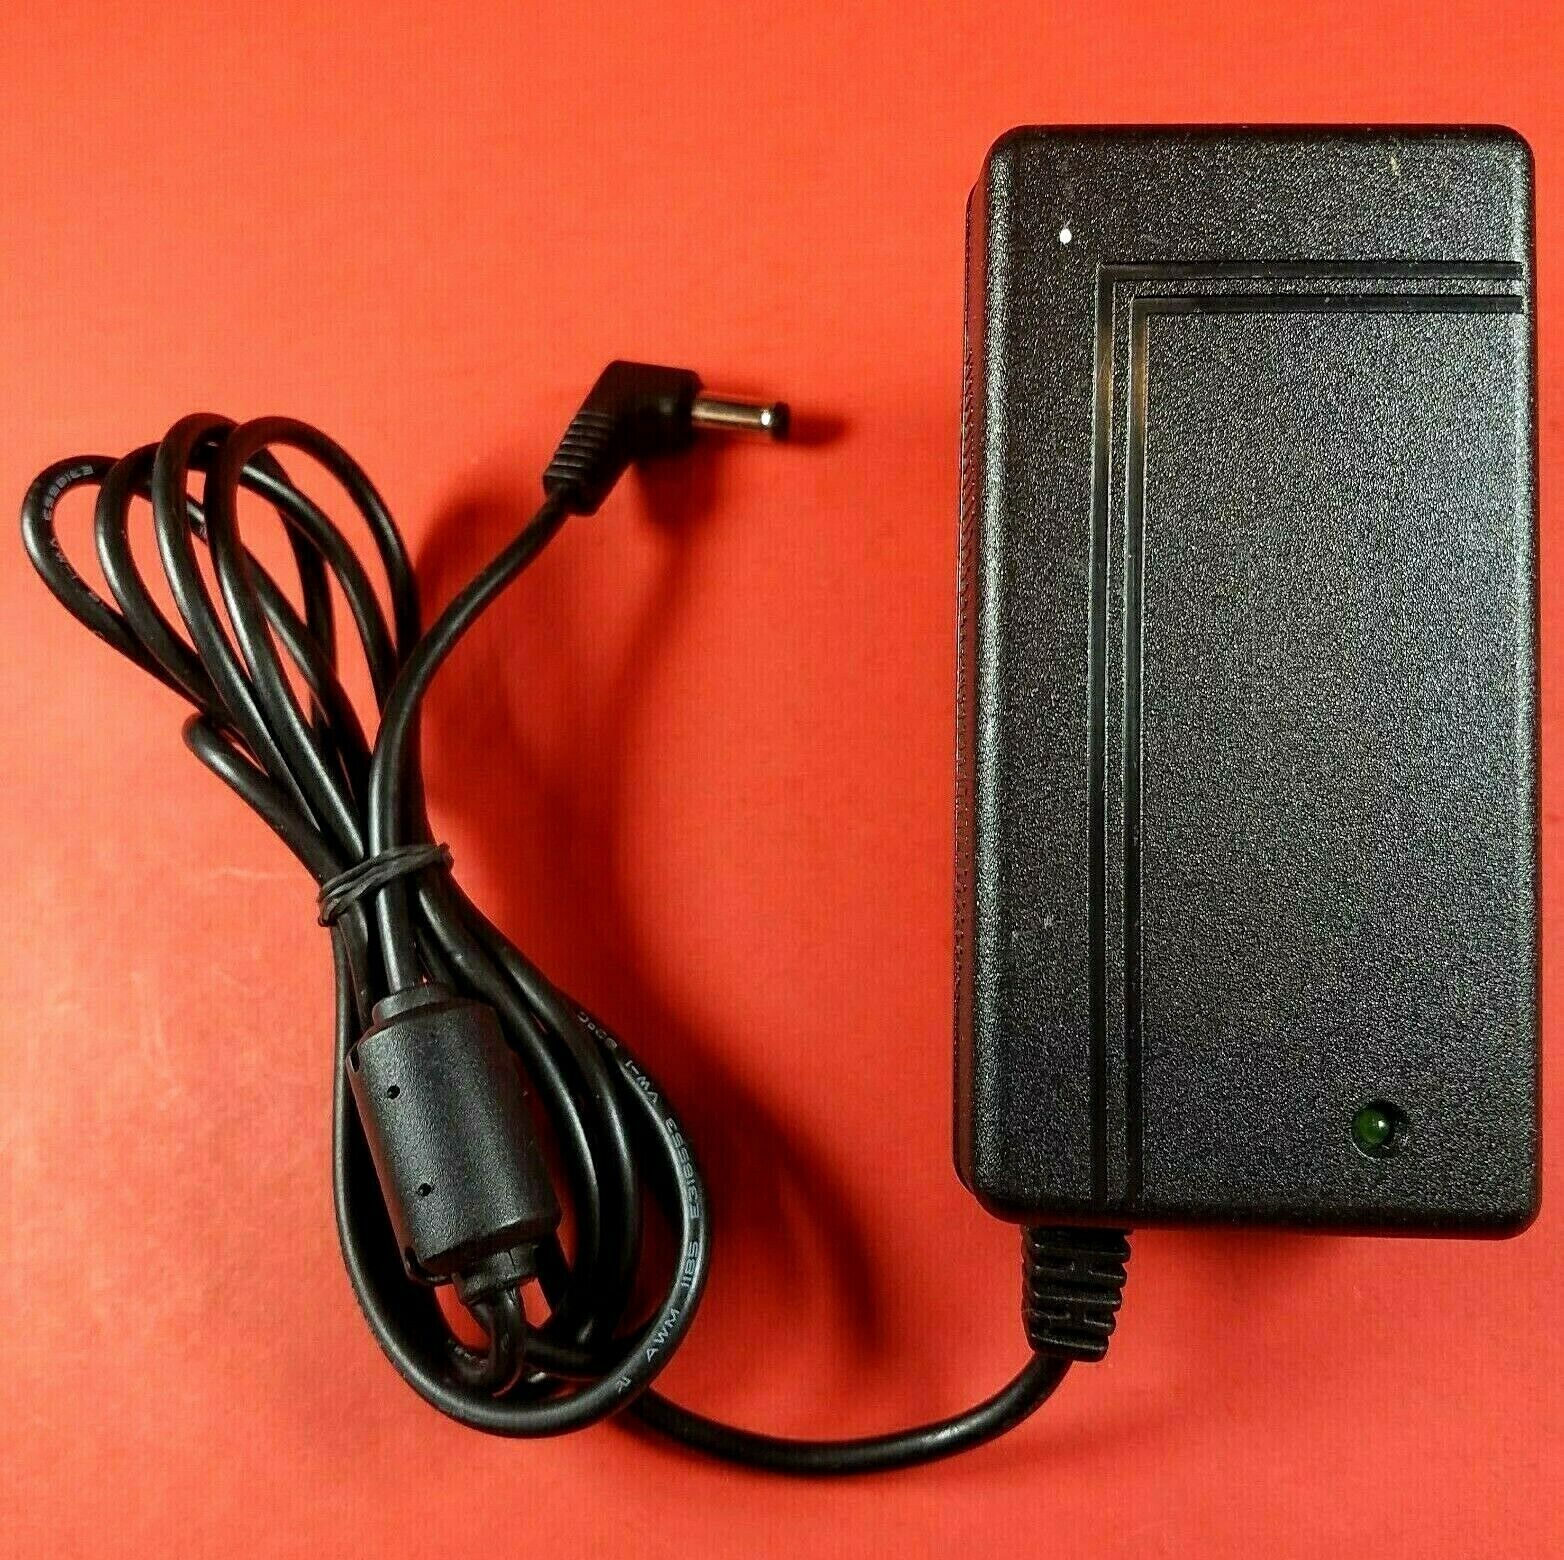 Shenzhen Sunup DC12030013A Power Supply Switching Adaptor 12V - 3A AC/DC Adapter Type: AC/DC Adapter Output Voltage: - Click Image to Close